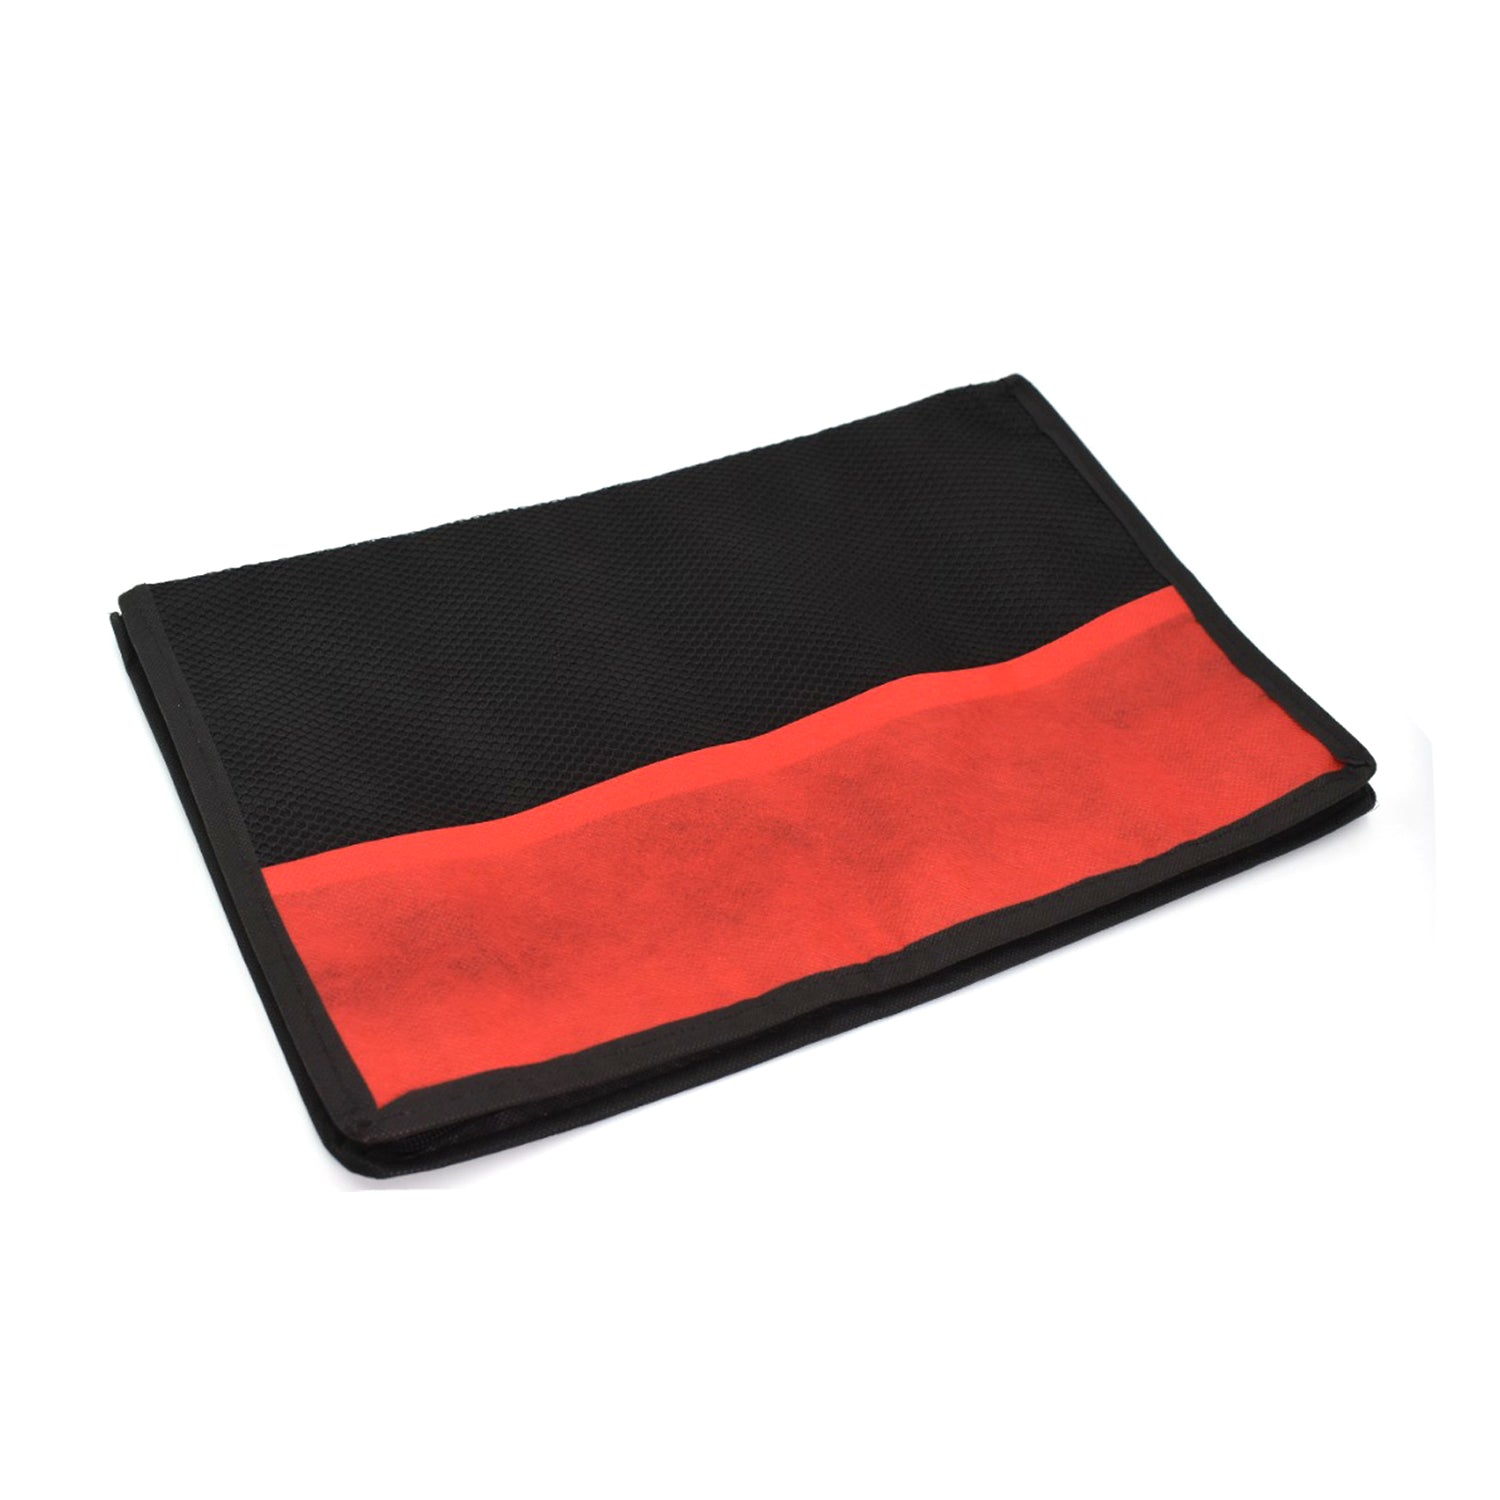 6163 Laptop Cover Bag Used As A Laptop Holder To Get Along With Laptop Anywhere Easily. freeshipping DeoDap